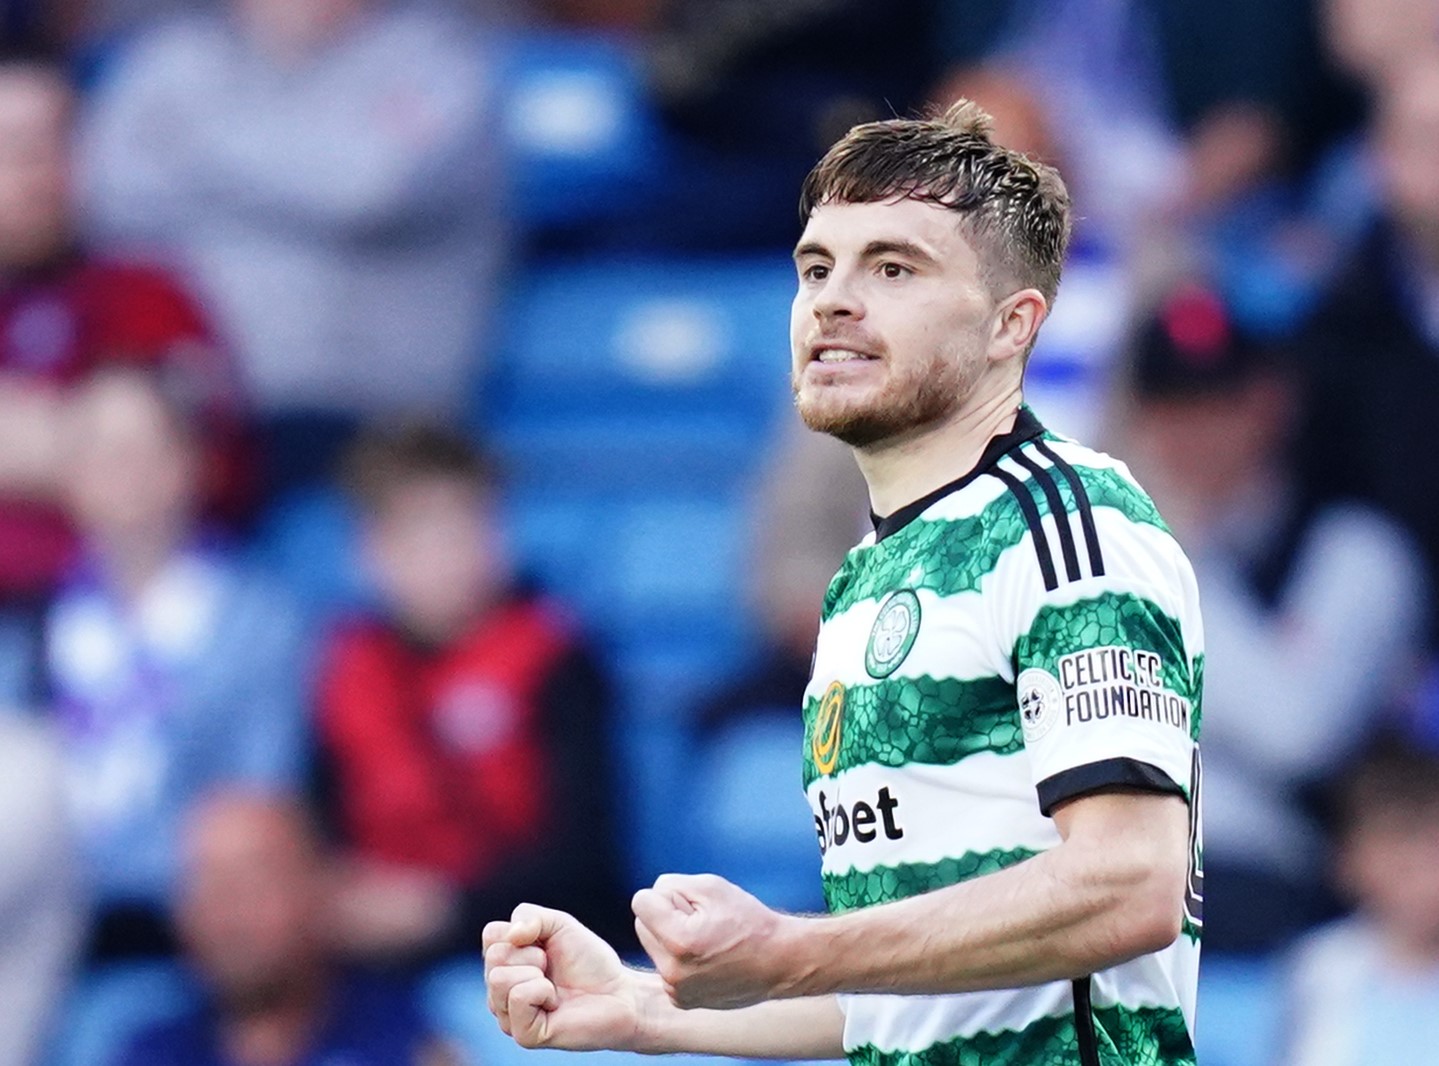 Reborn Celtic star Forrest ready to play anywhere for Scots